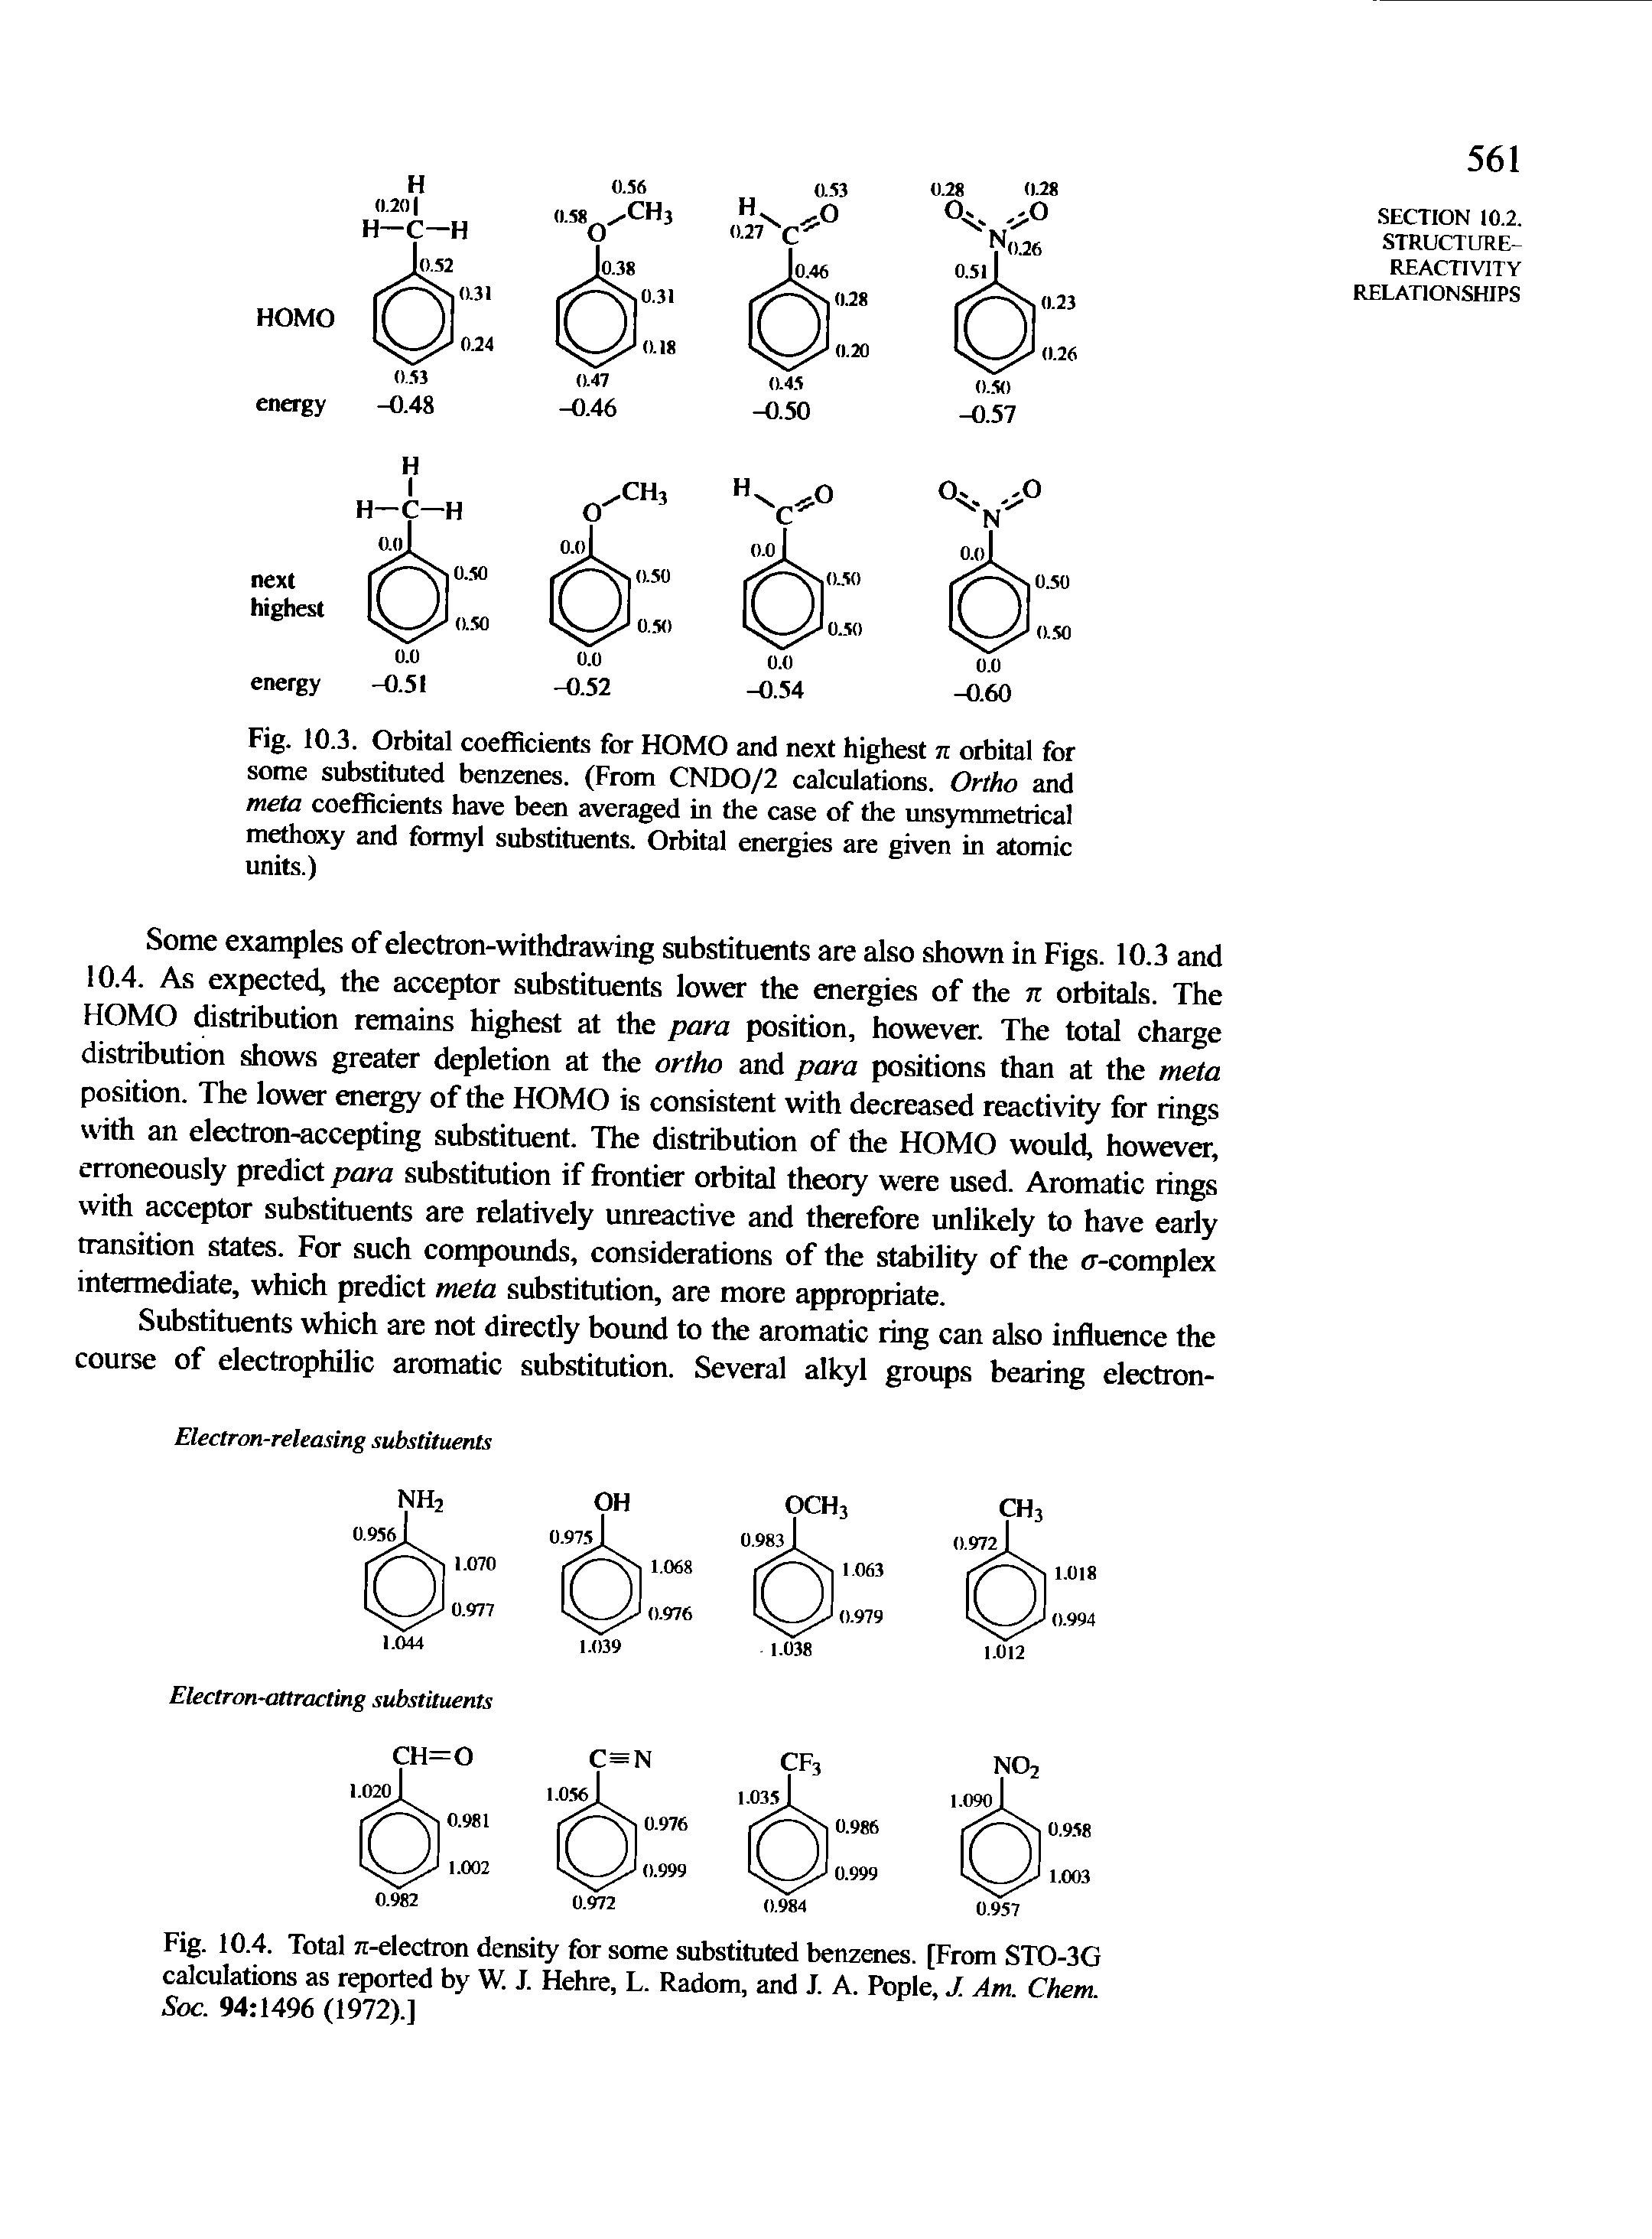 Fig. 10.4. Total 7i-electron density for some substituted benzenes. [From STO-3G calculations as reported by W. J. Hehre, L. Radom, and J. A. Pople, J. Am. Chem. Soc. 94 1496 (1972).]...